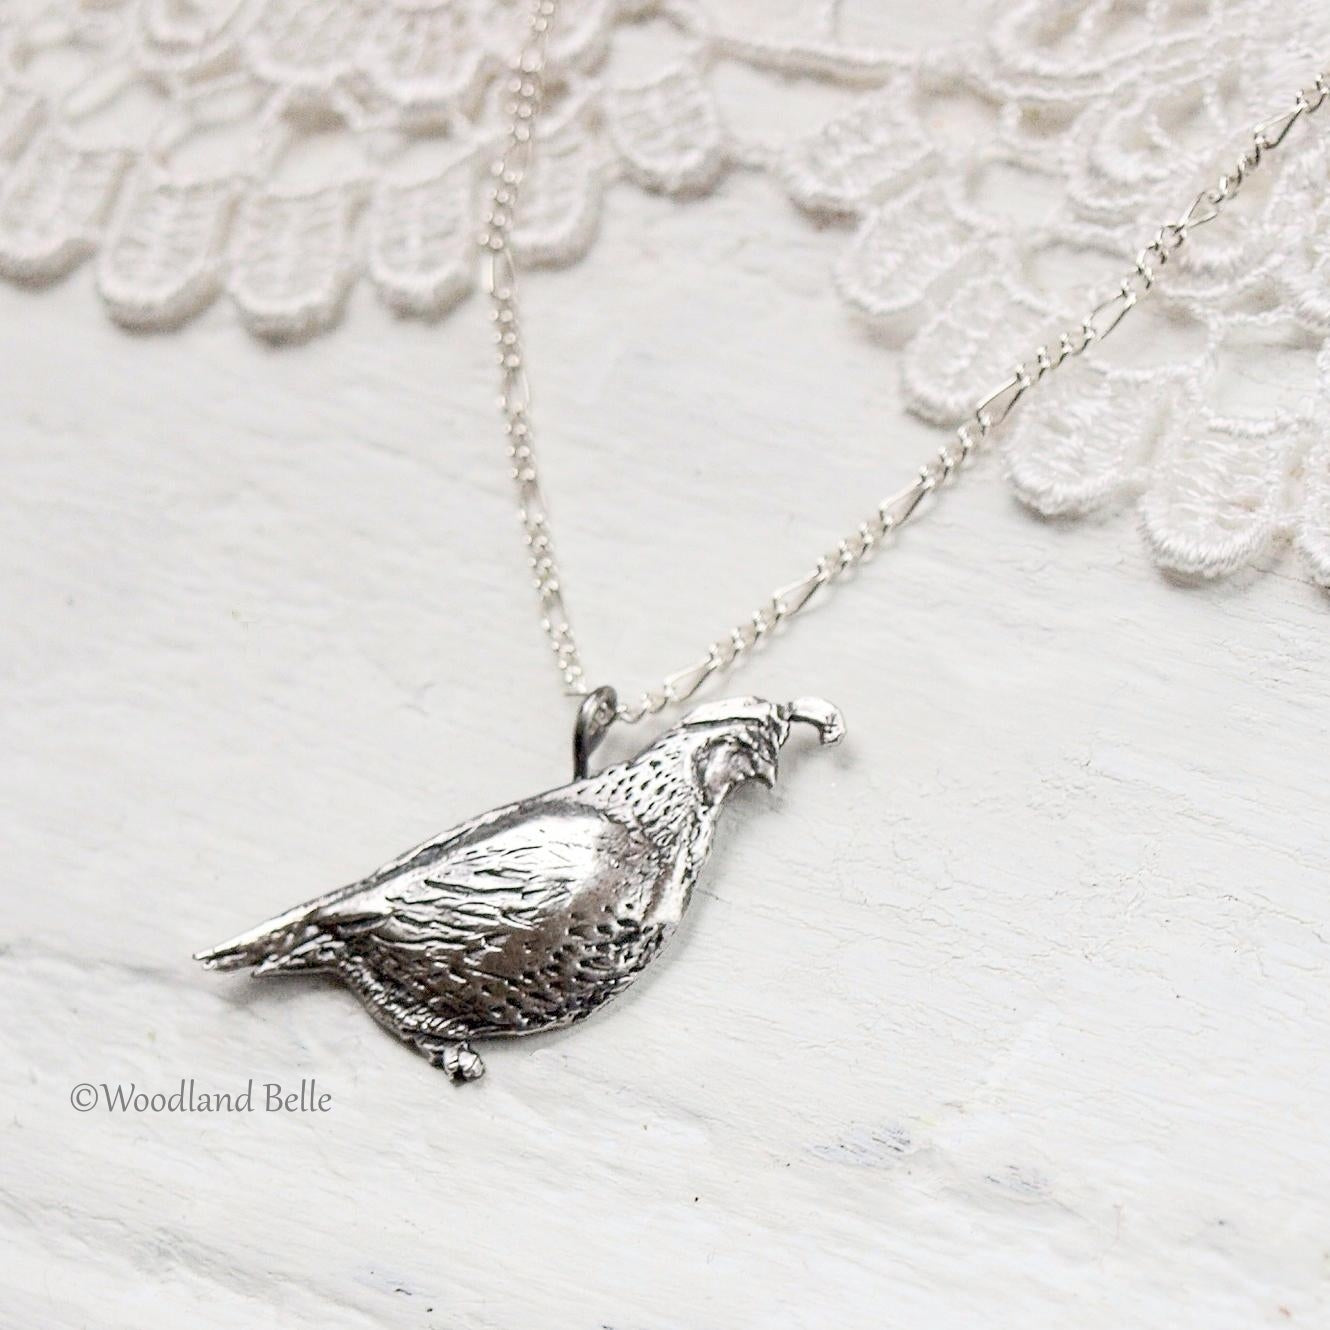 Quail Necklace - Sterling Silver California Quail Bird Pendant - Bird Lover Gift for Her, by Woodland Belle